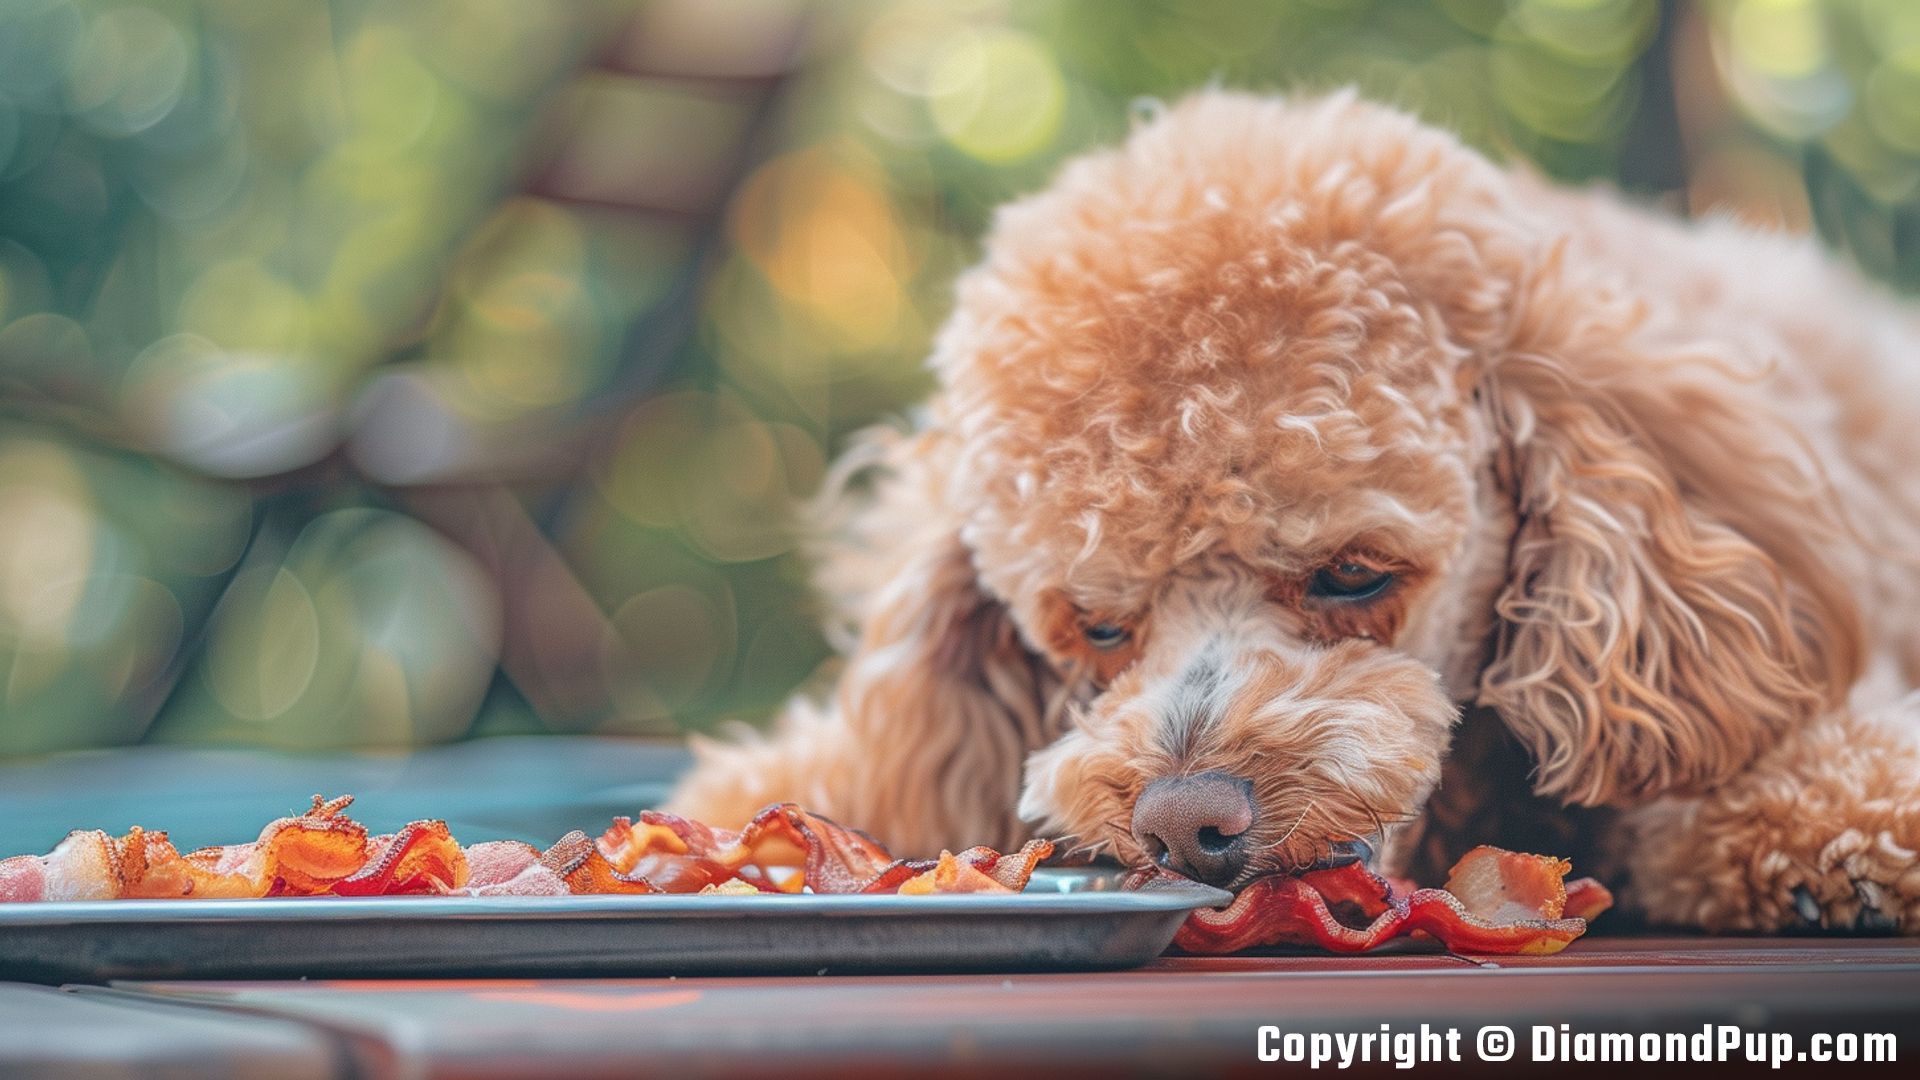 Photograph of a Cute Poodle Snacking on Bacon